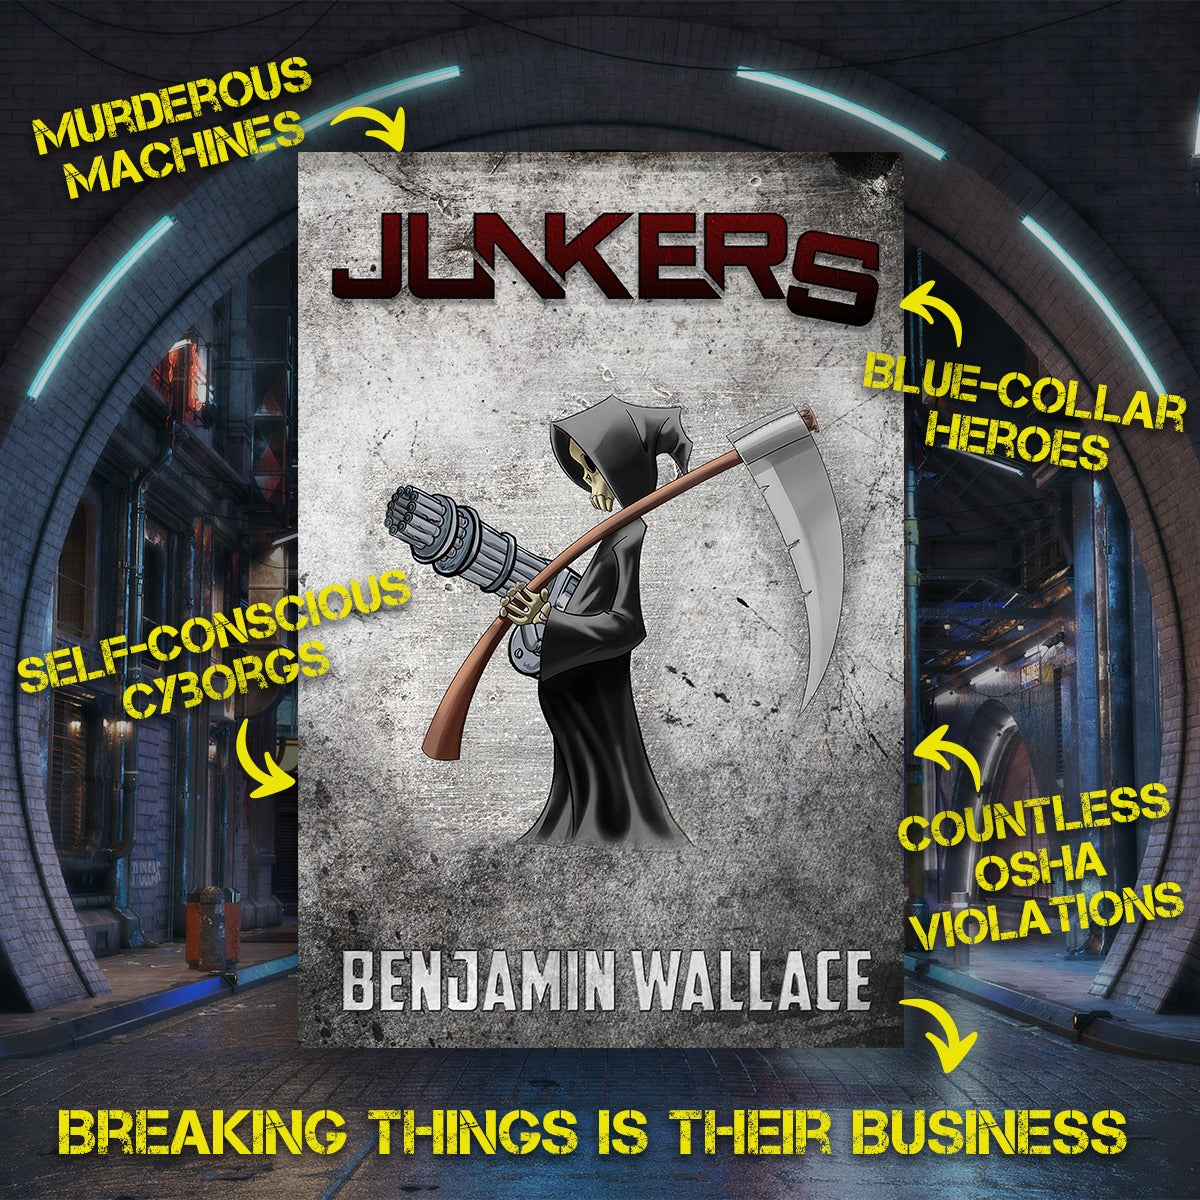 Junkers Collection (Kindle and ePub)